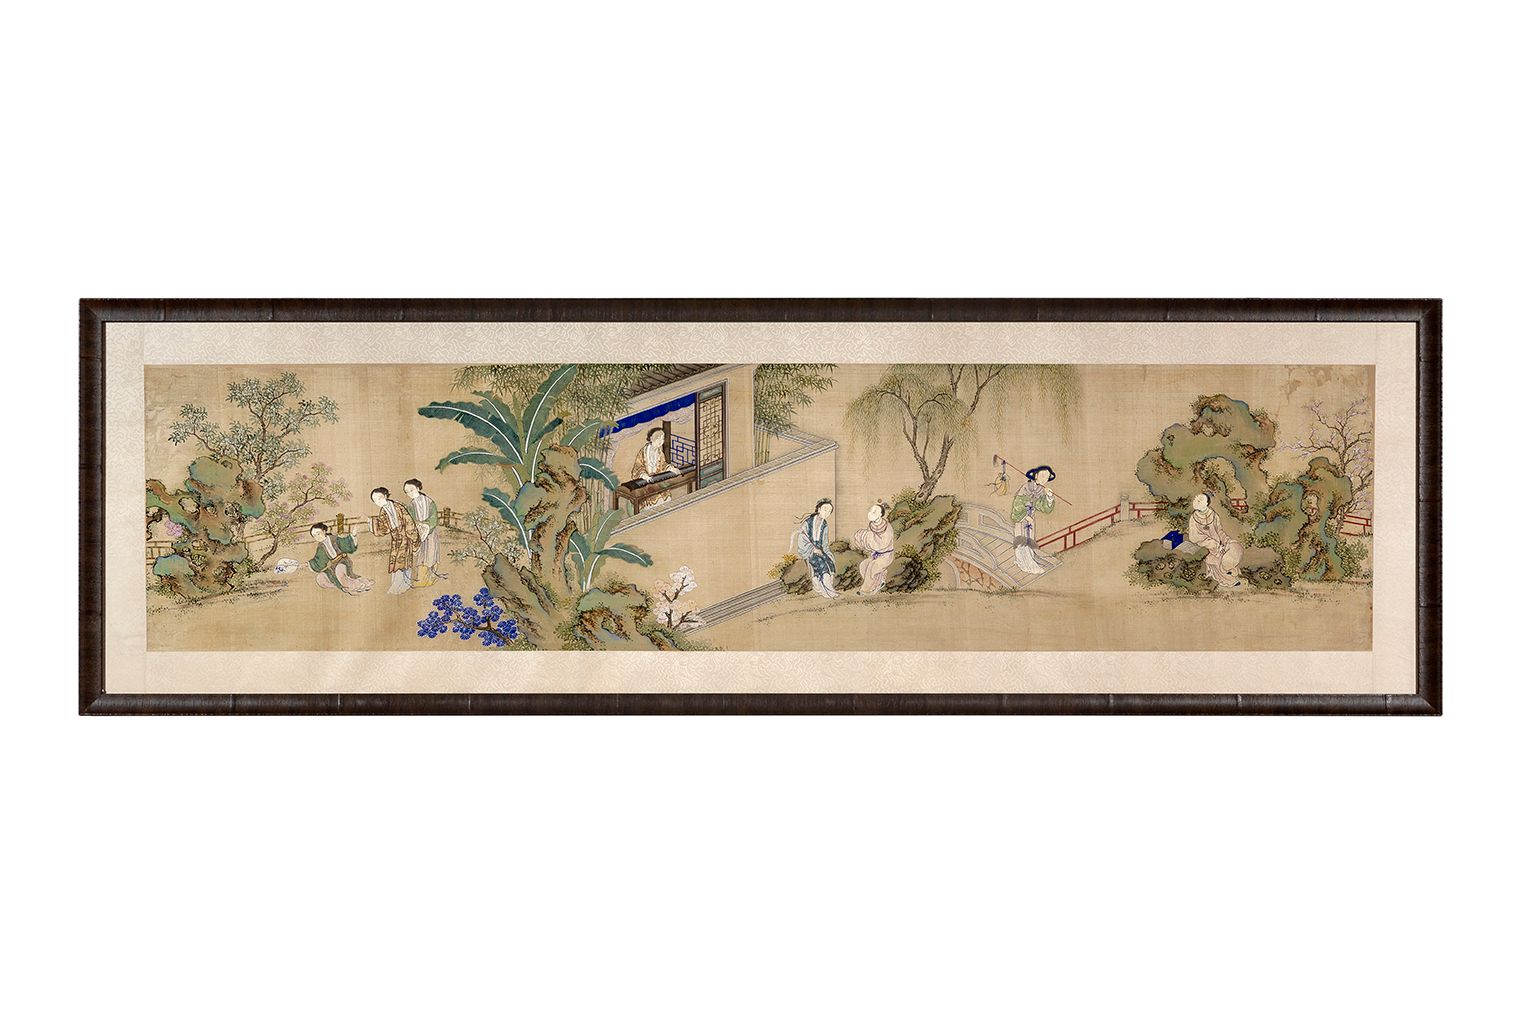 CHINE DYNASTIE QING, XVIIIe SIÈCLE Painting
Ink and pigments on silk depicting a&hellip;